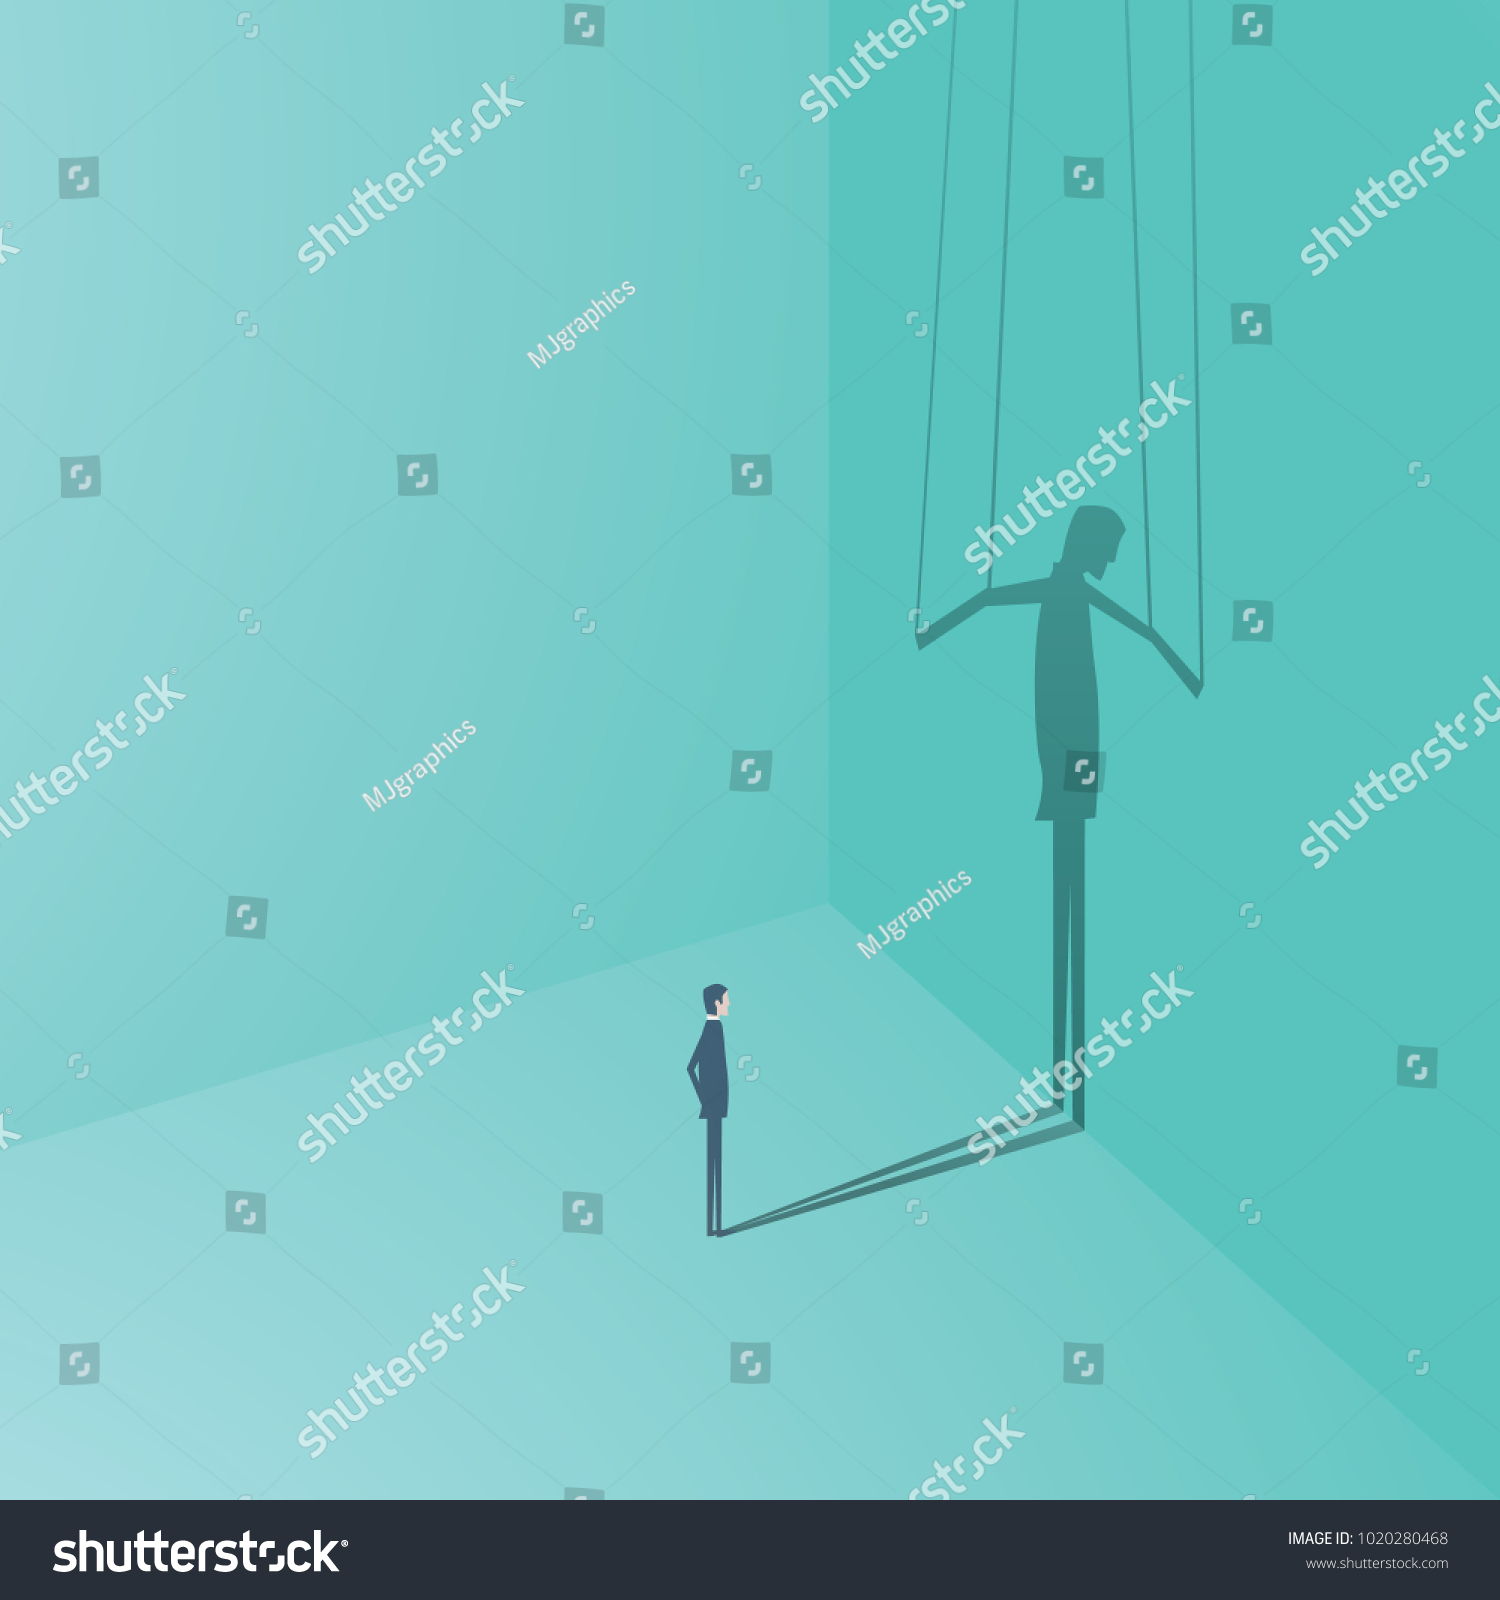 Exploited Stock Vectors Images And Vector Art Shutterstock 7458